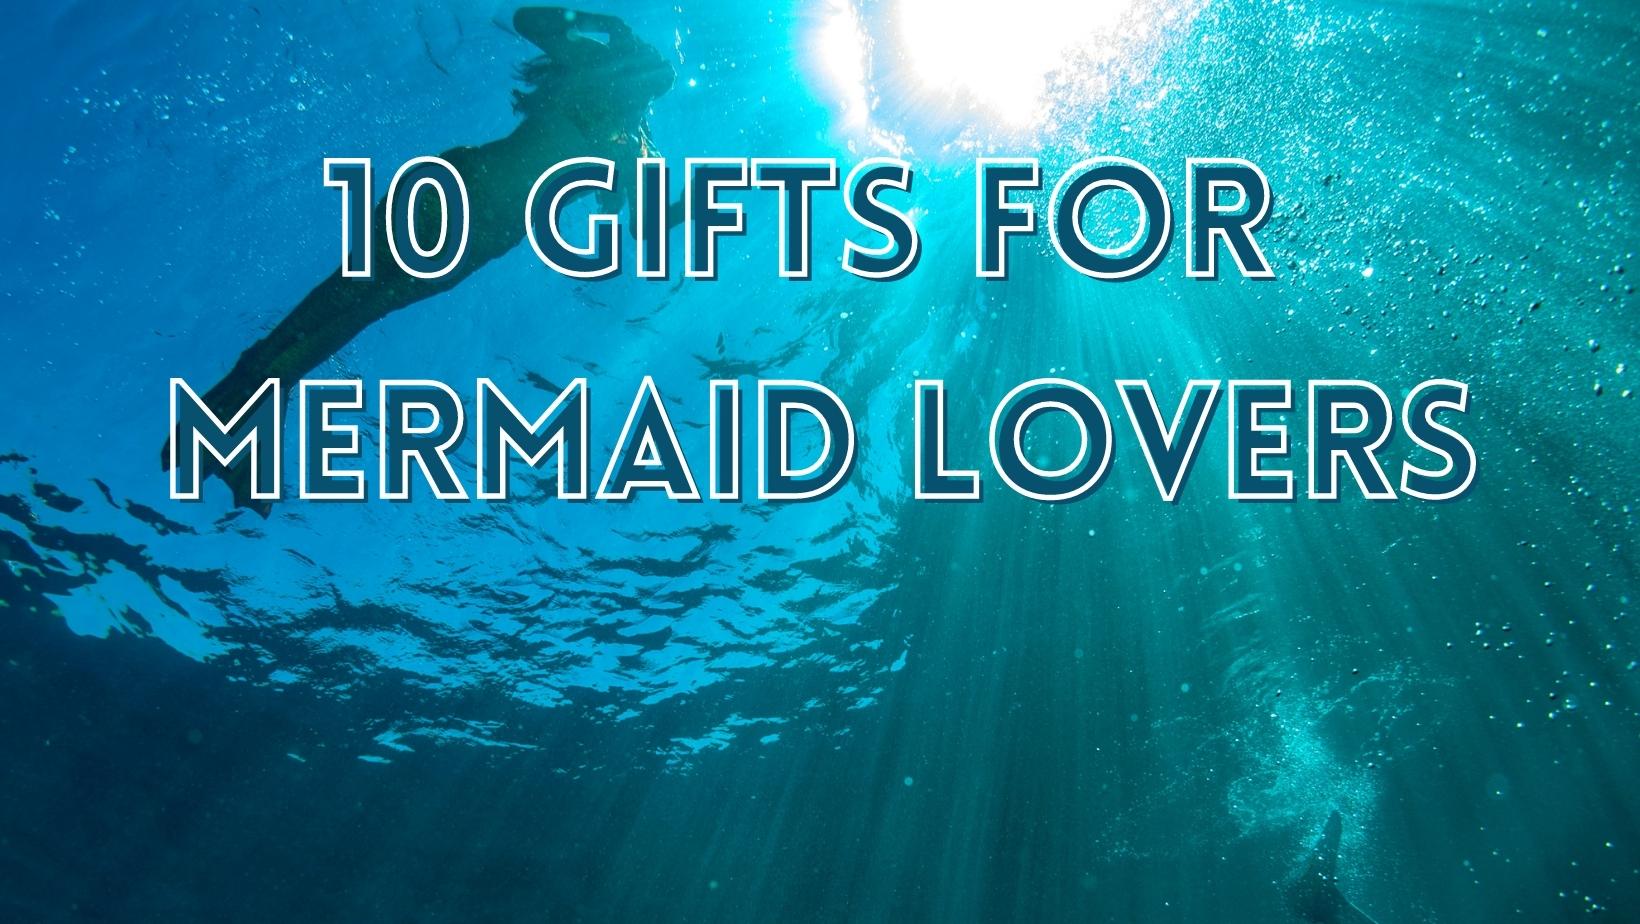 Gifts for Mermaid Lovers